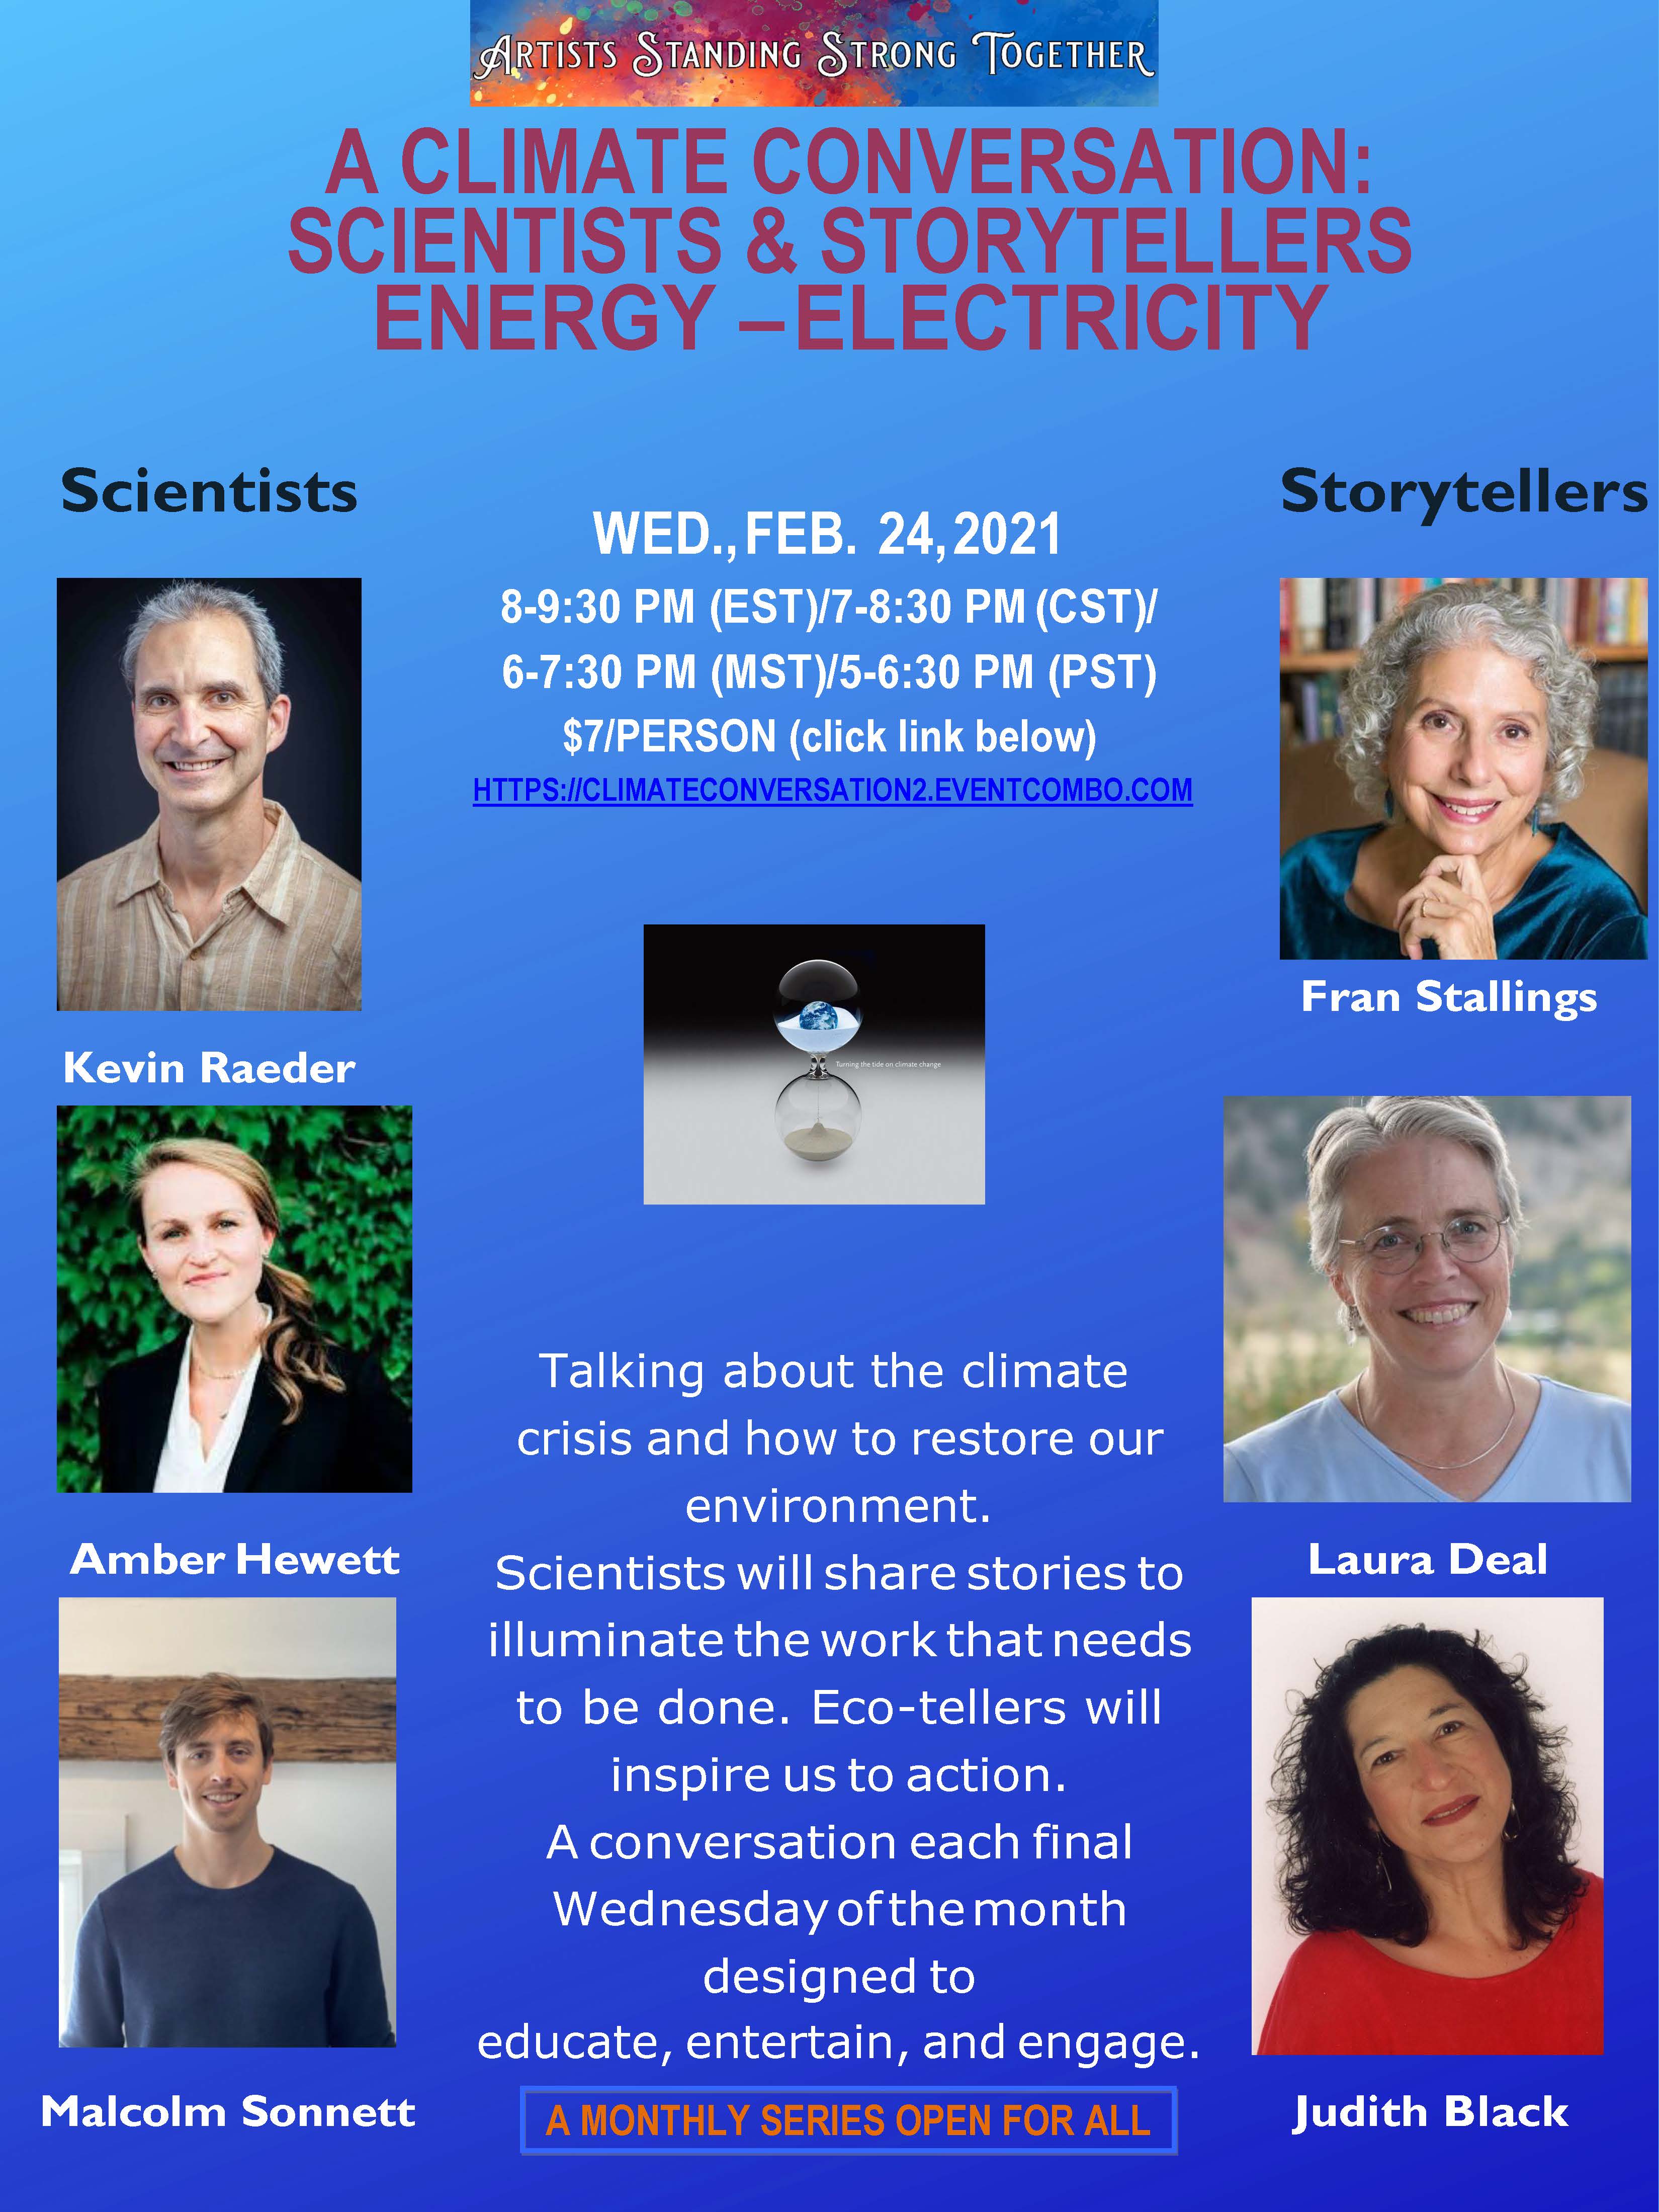 A Climate Conversation: Scientists and Storytellers 
Energy - Electricity